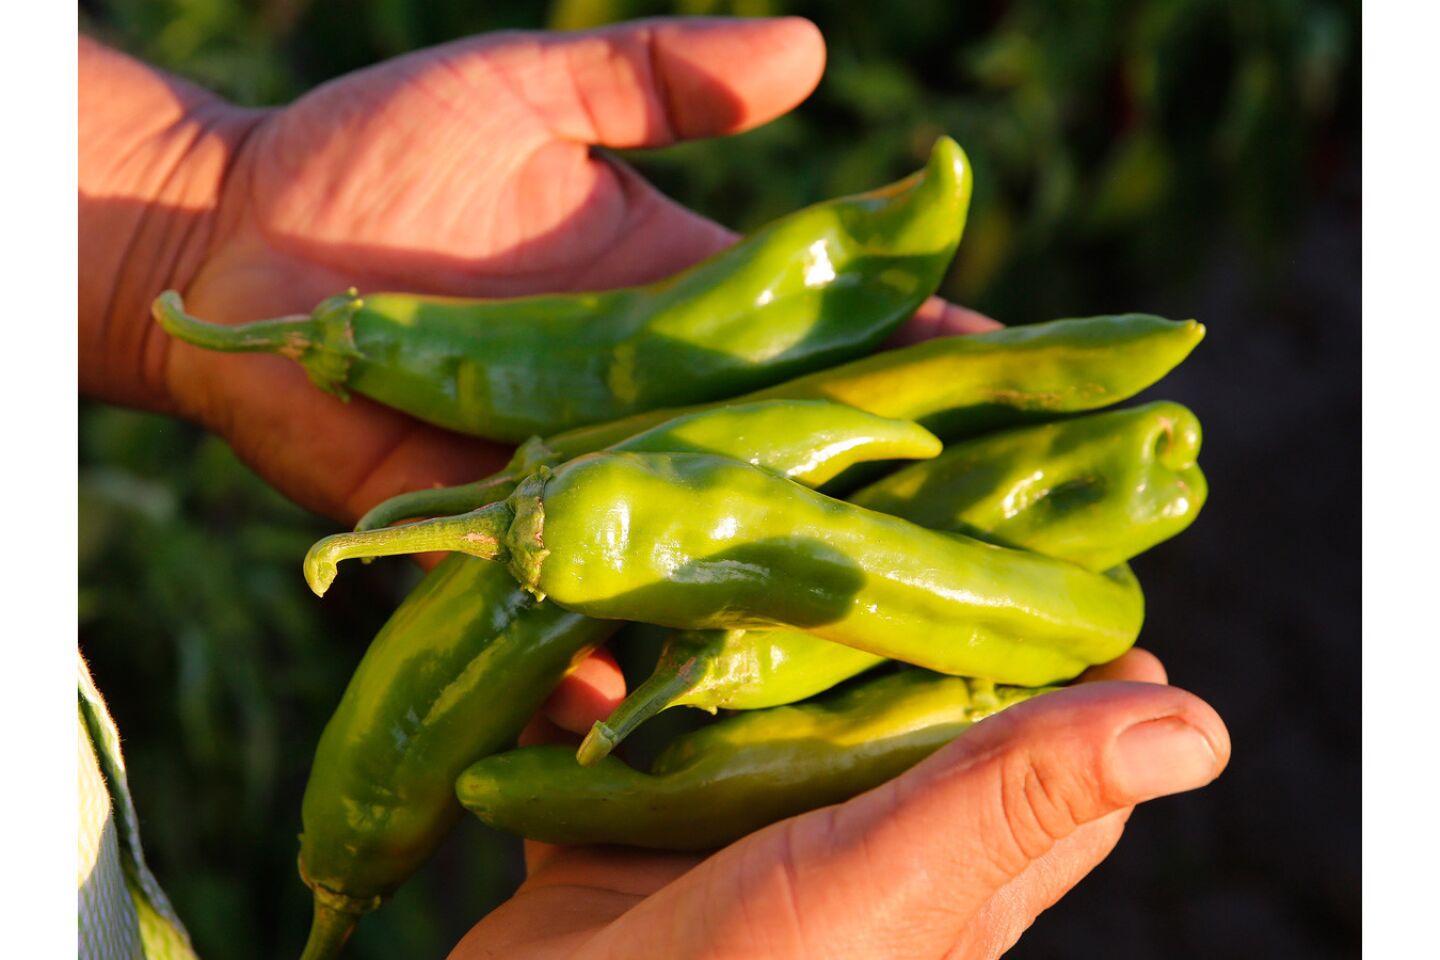 Farmer Sergio Grajeda holds green Hatch chiles from his fields in Hatch, NM.